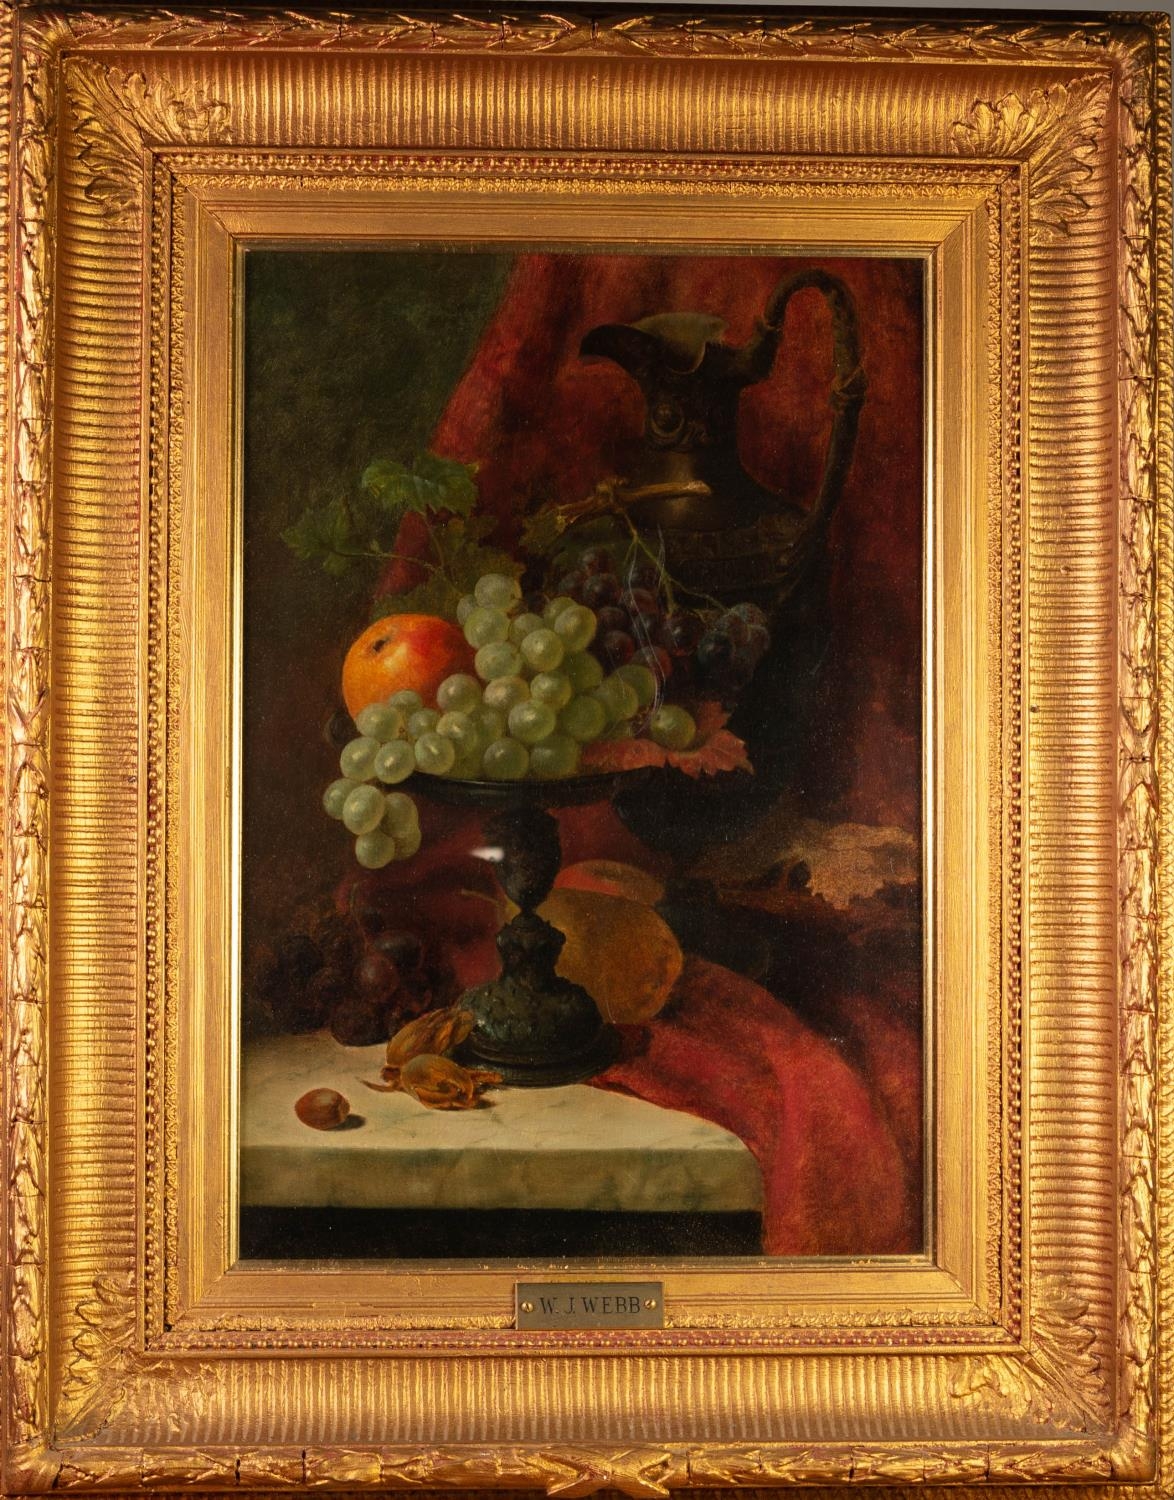 W.J. WEBB  OIL ON RELINED CANVAS  Still life of grapes, apples and hazelnuts, with a bronze tazza - Image 2 of 2